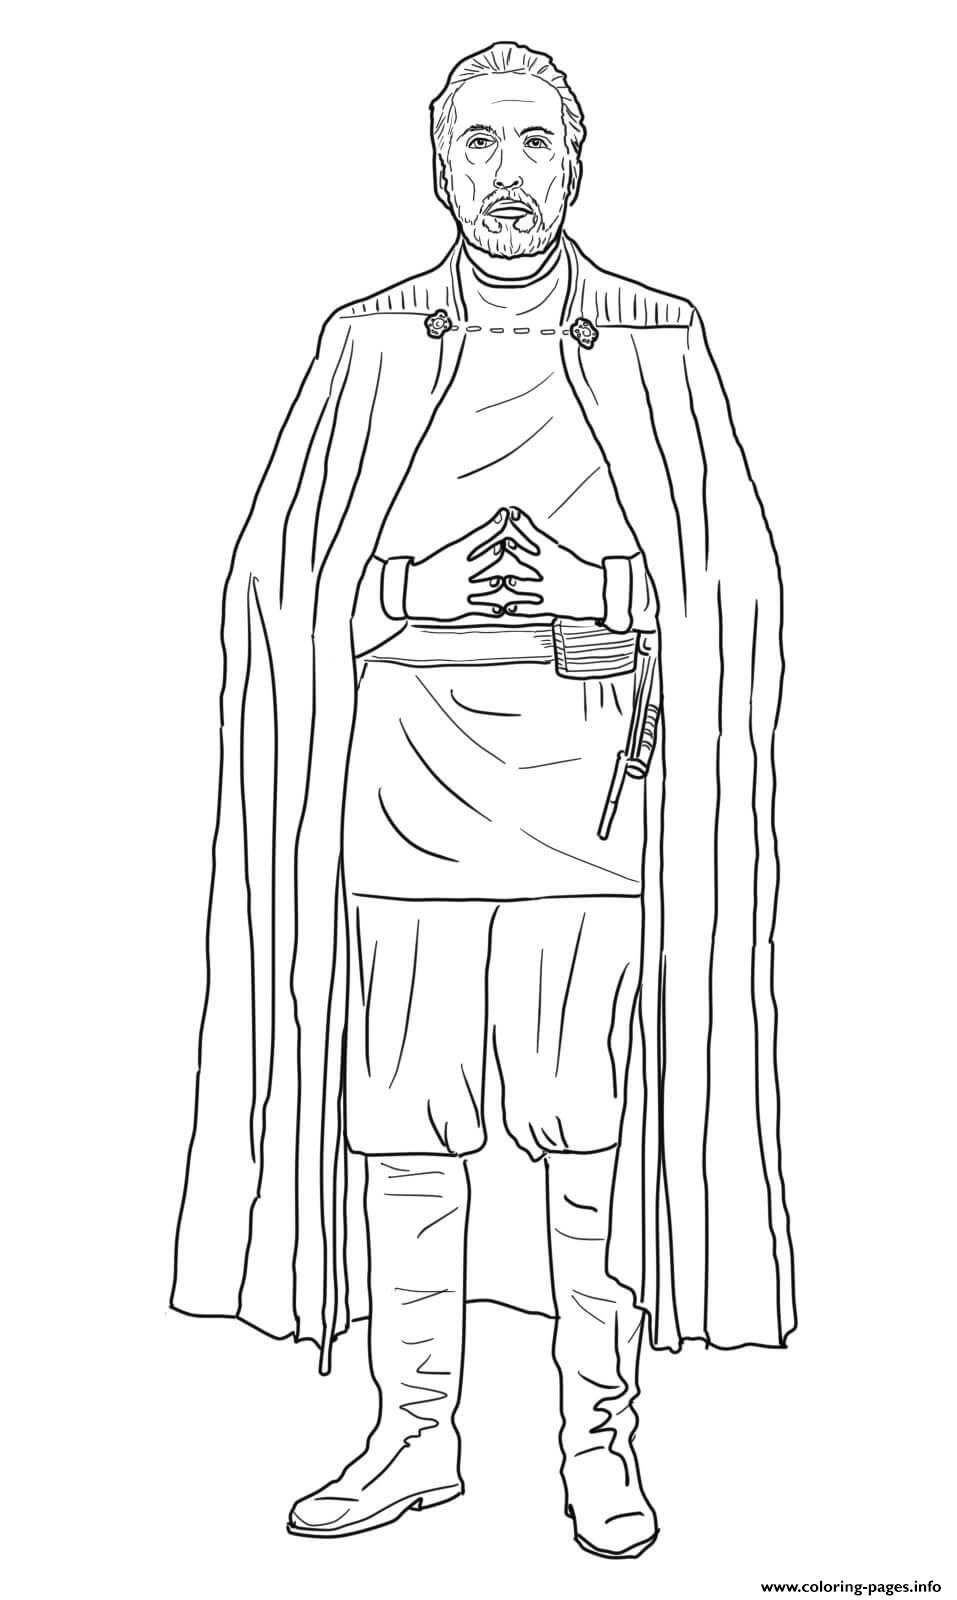 Count Dooku Star Wars Episode II Attack Of The Clones Coloring page